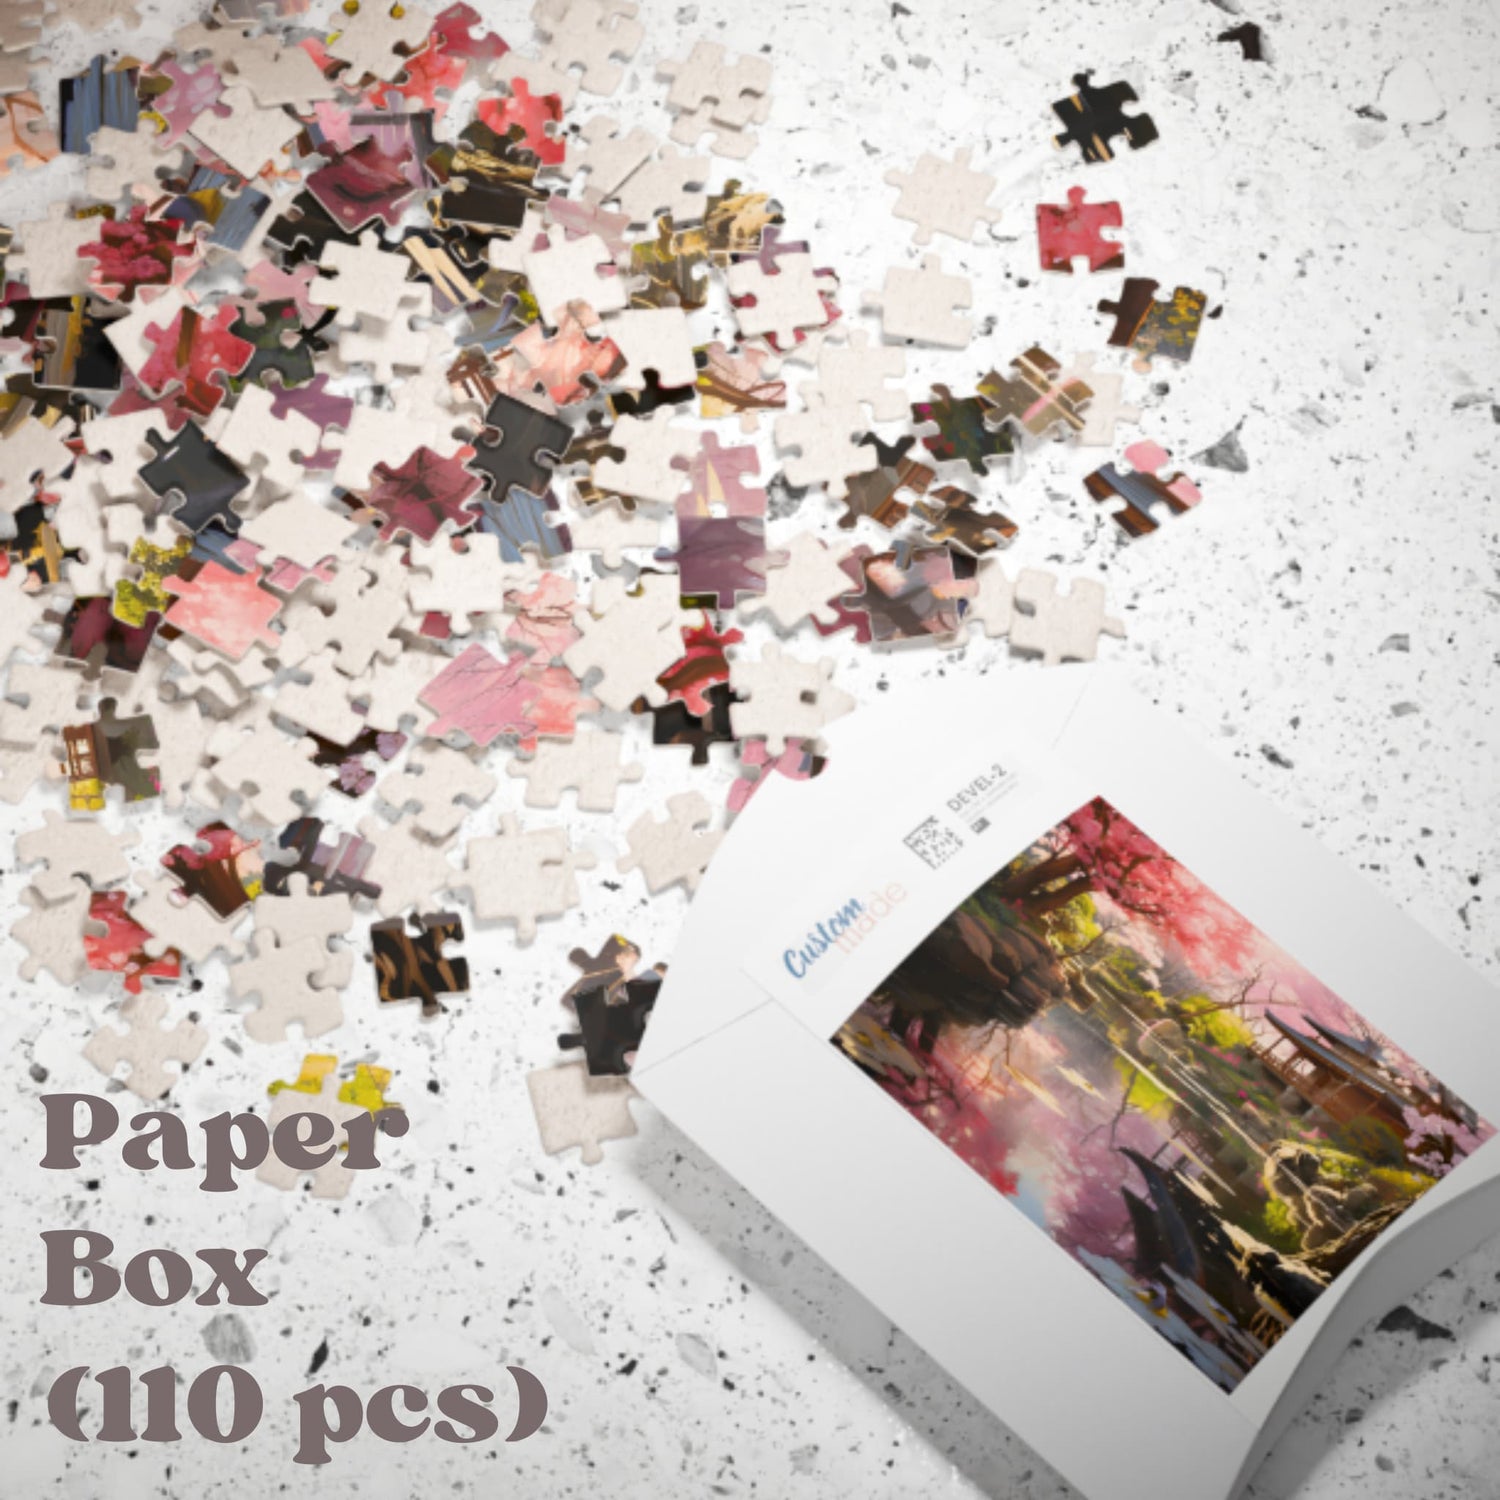 puzzle paper box variant for 110 pieces of puzzle